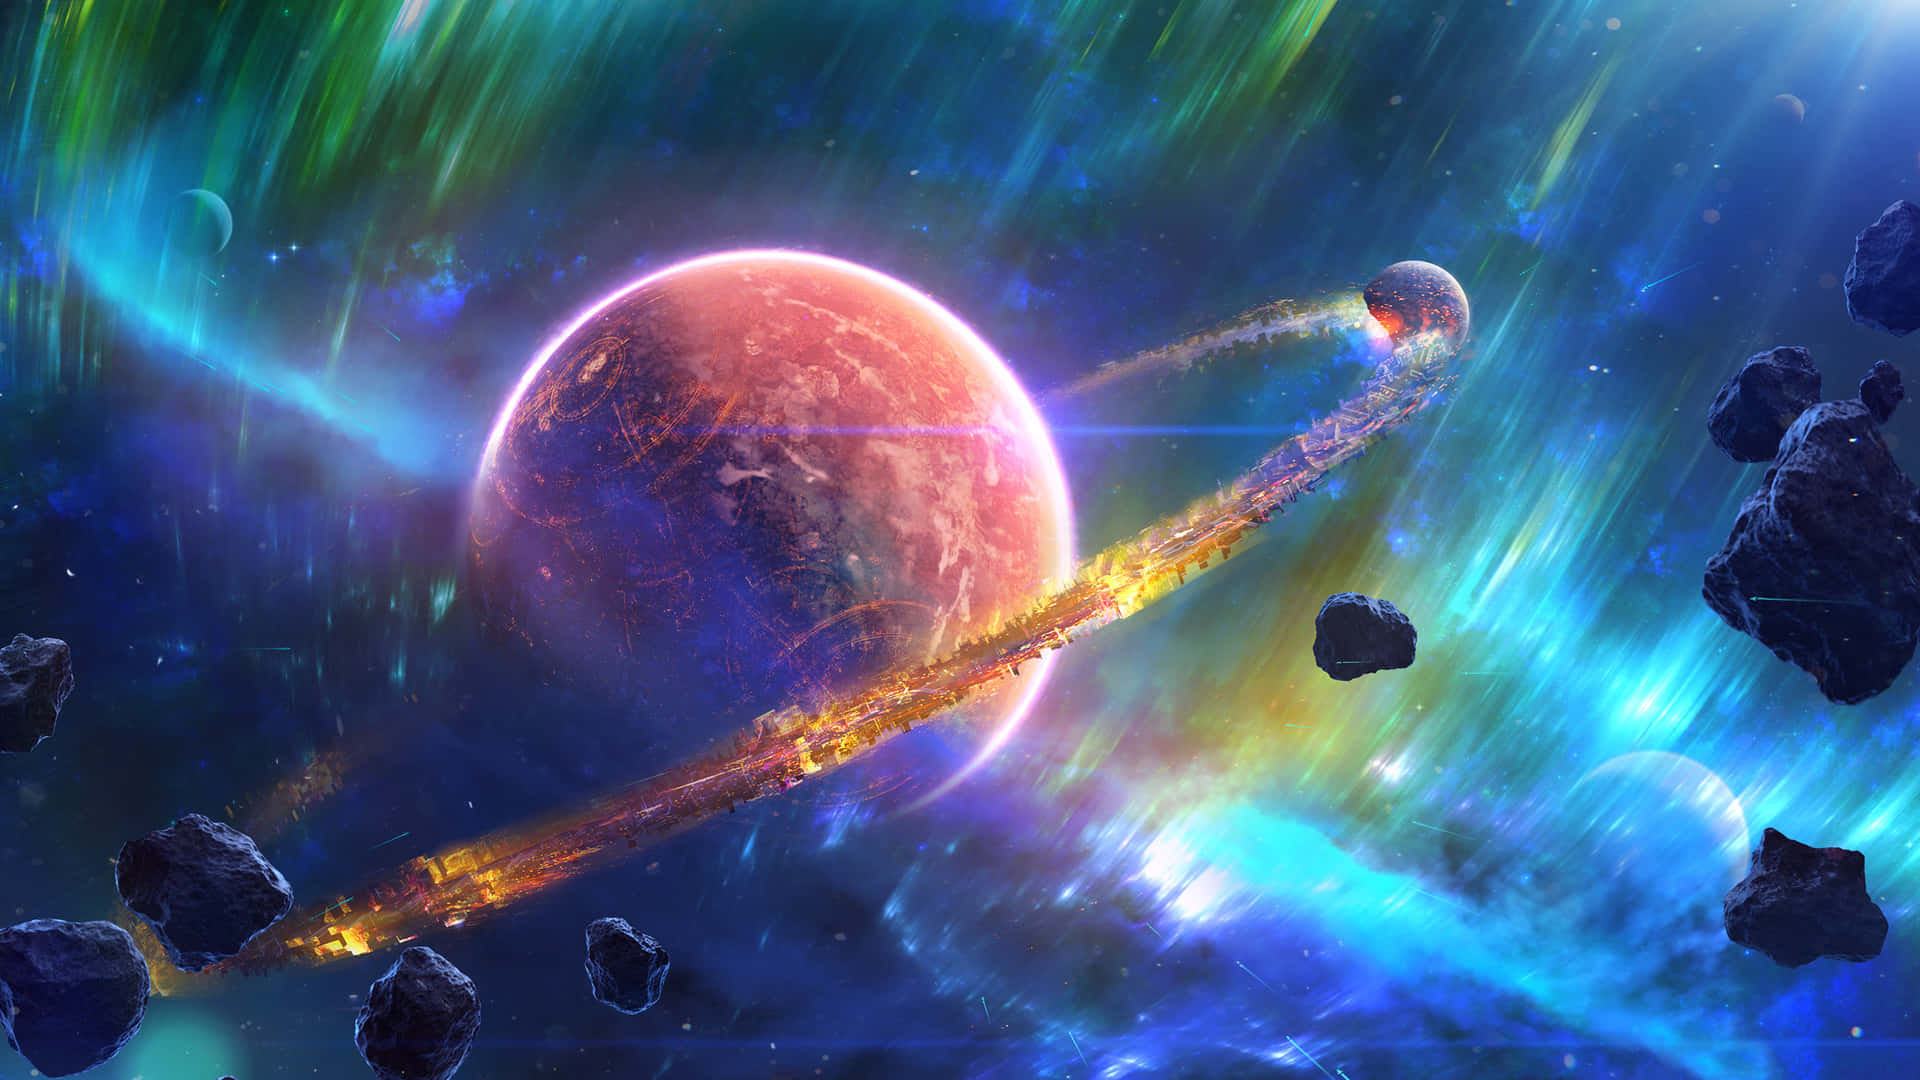 "Take a look into the vastness of space through this mesmerizing scenery" Wallpaper